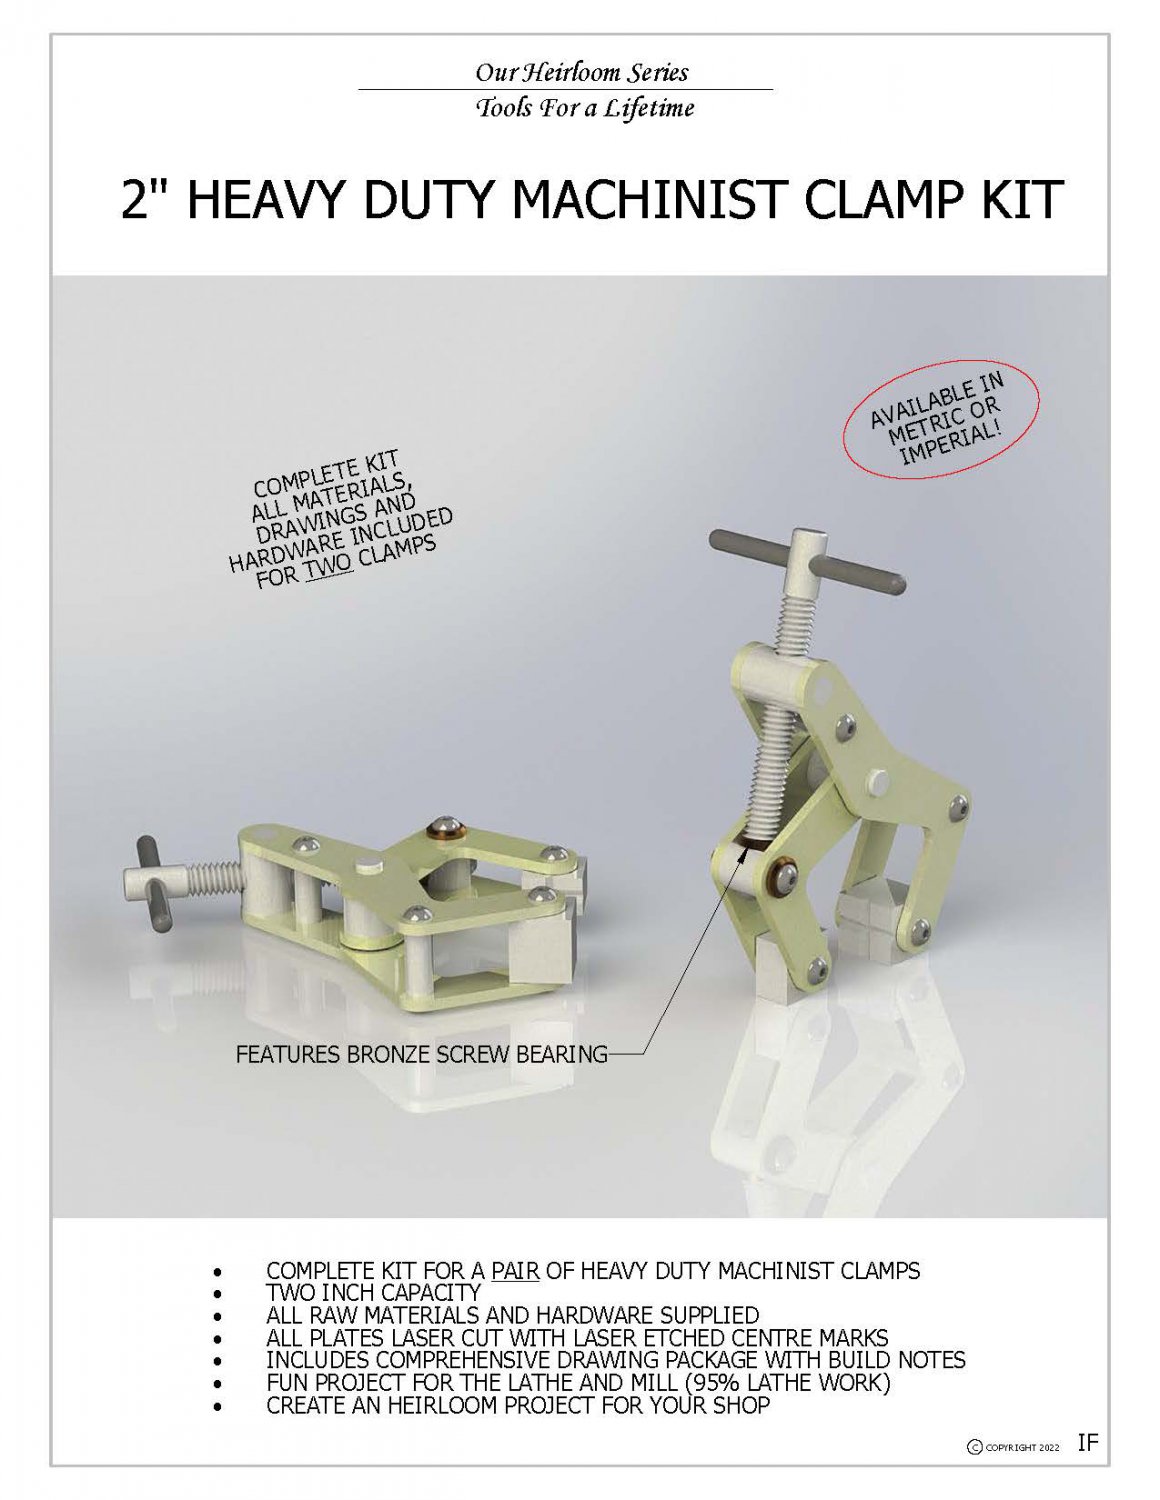 2MCK PAIR 2 INCH MACHINIST CLAMP KIT IF OPTO_Page_01.jpg